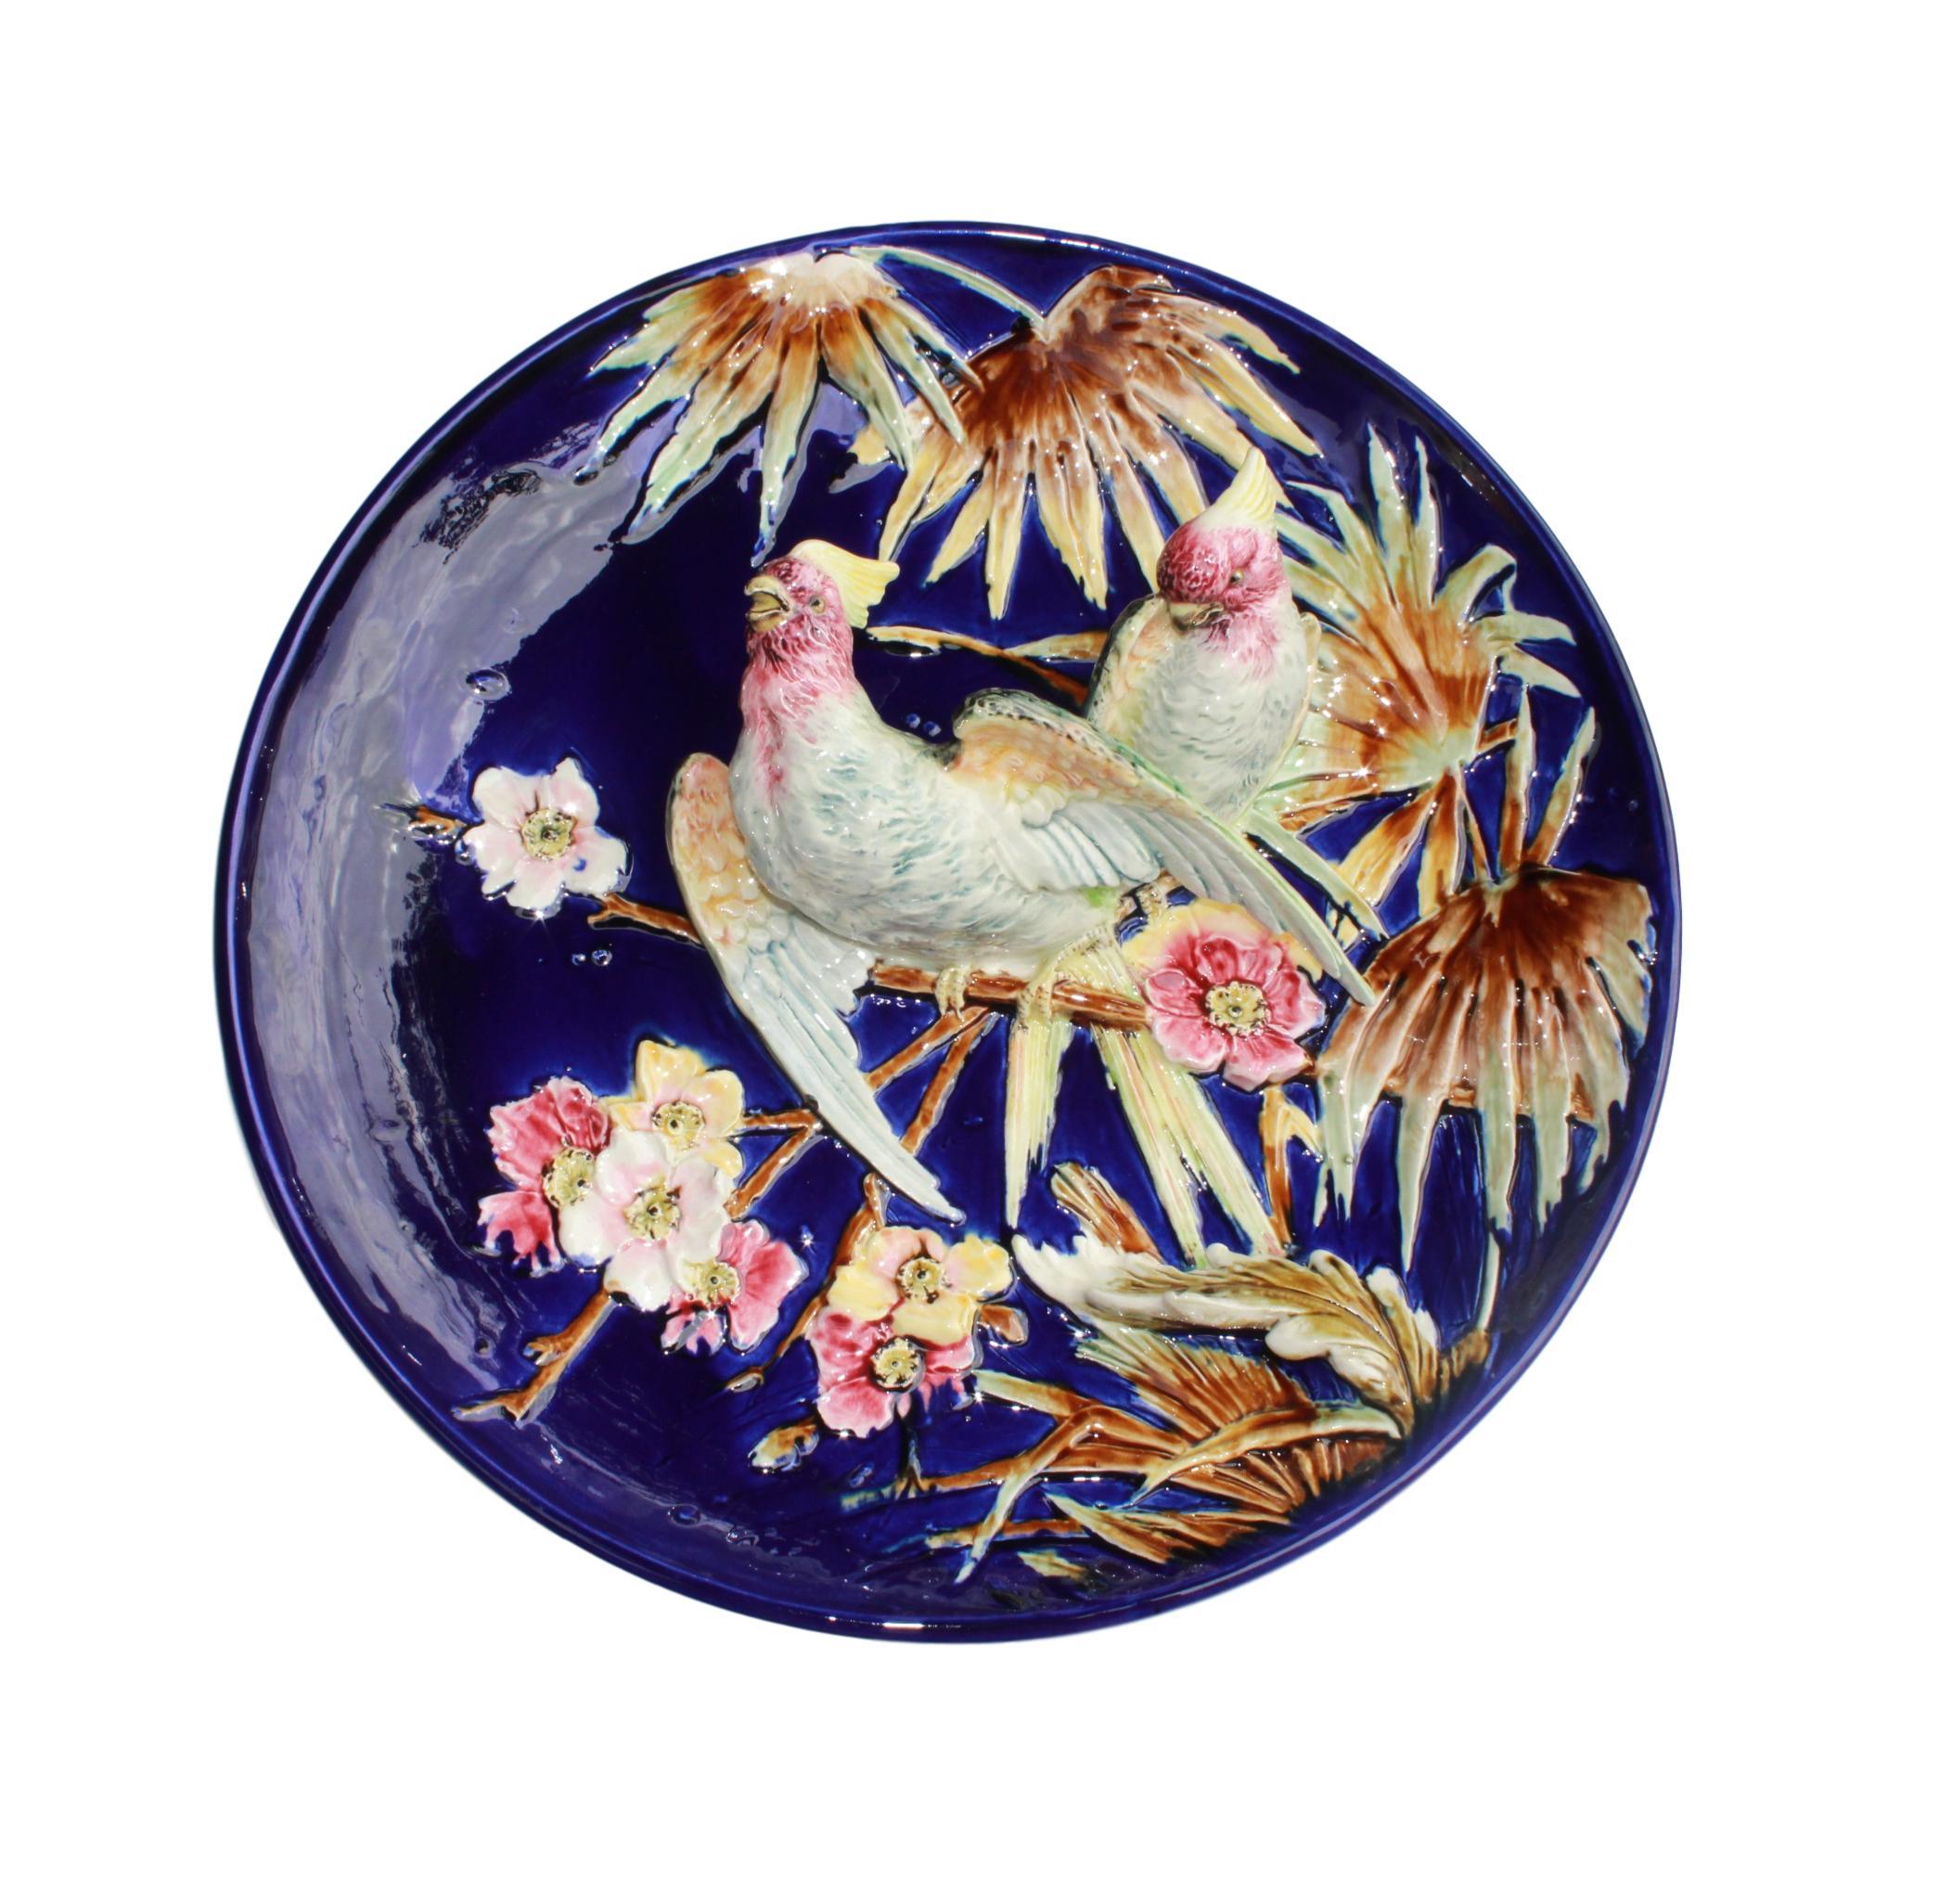 Very Large French Majolica (Barbotine) Trompe L'oeil Charger or plaque, with two naturalistically glazed cockatoos, molded in high relief among bamboo branches and flowers glazed in red, pink, and yellow, against a cobalt blue glazed ground, French,